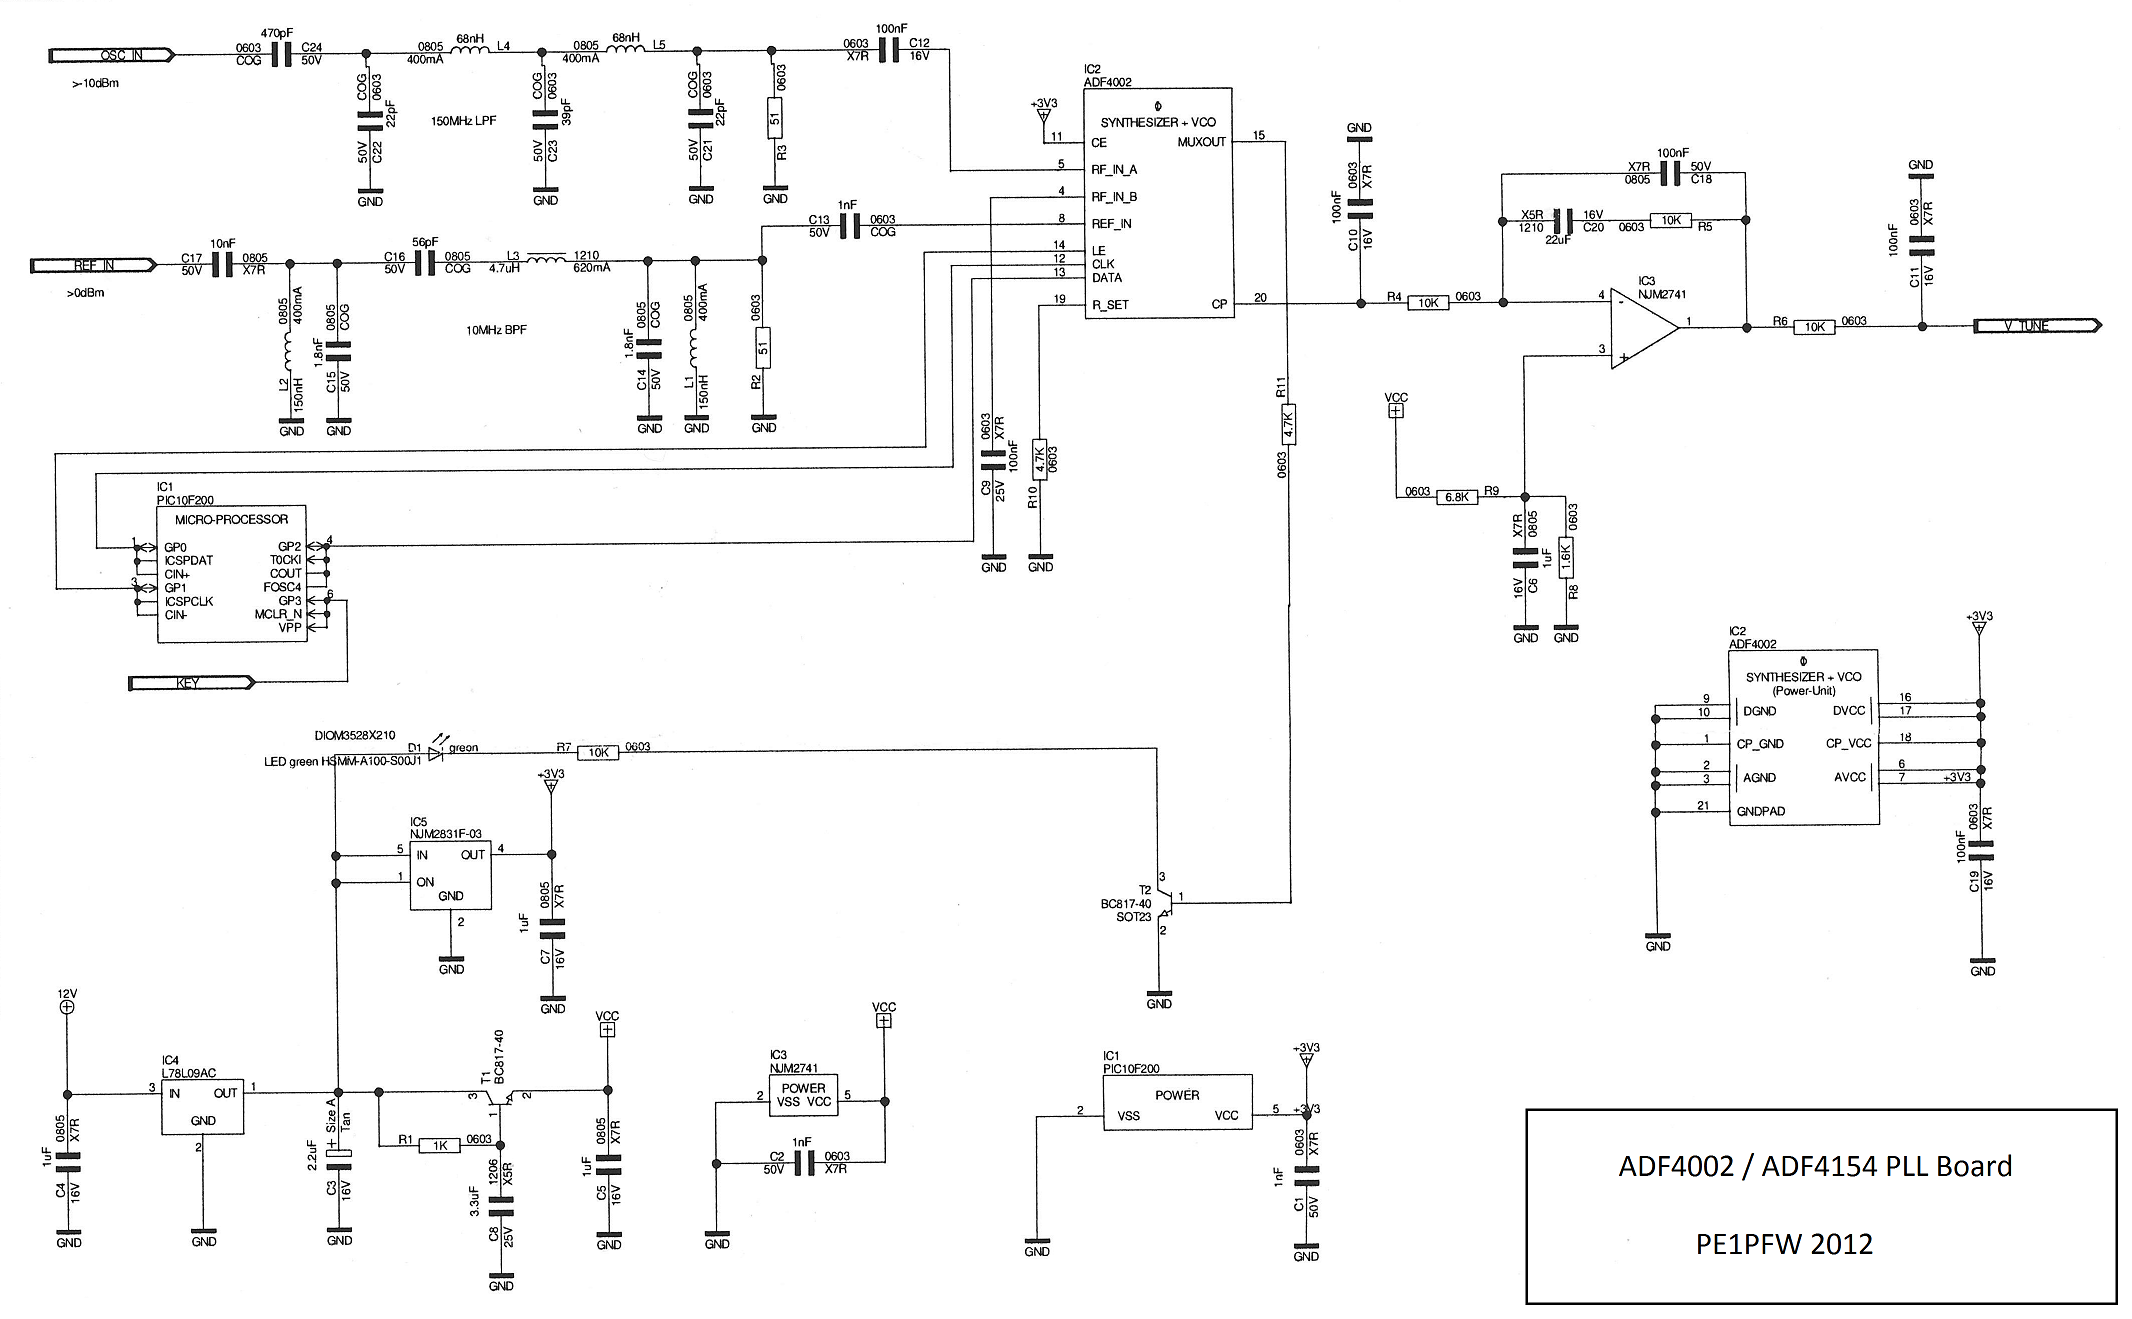 /cmsms/uploads/images/pcbs/ADF4002 PLL board by PE1PFW schematic